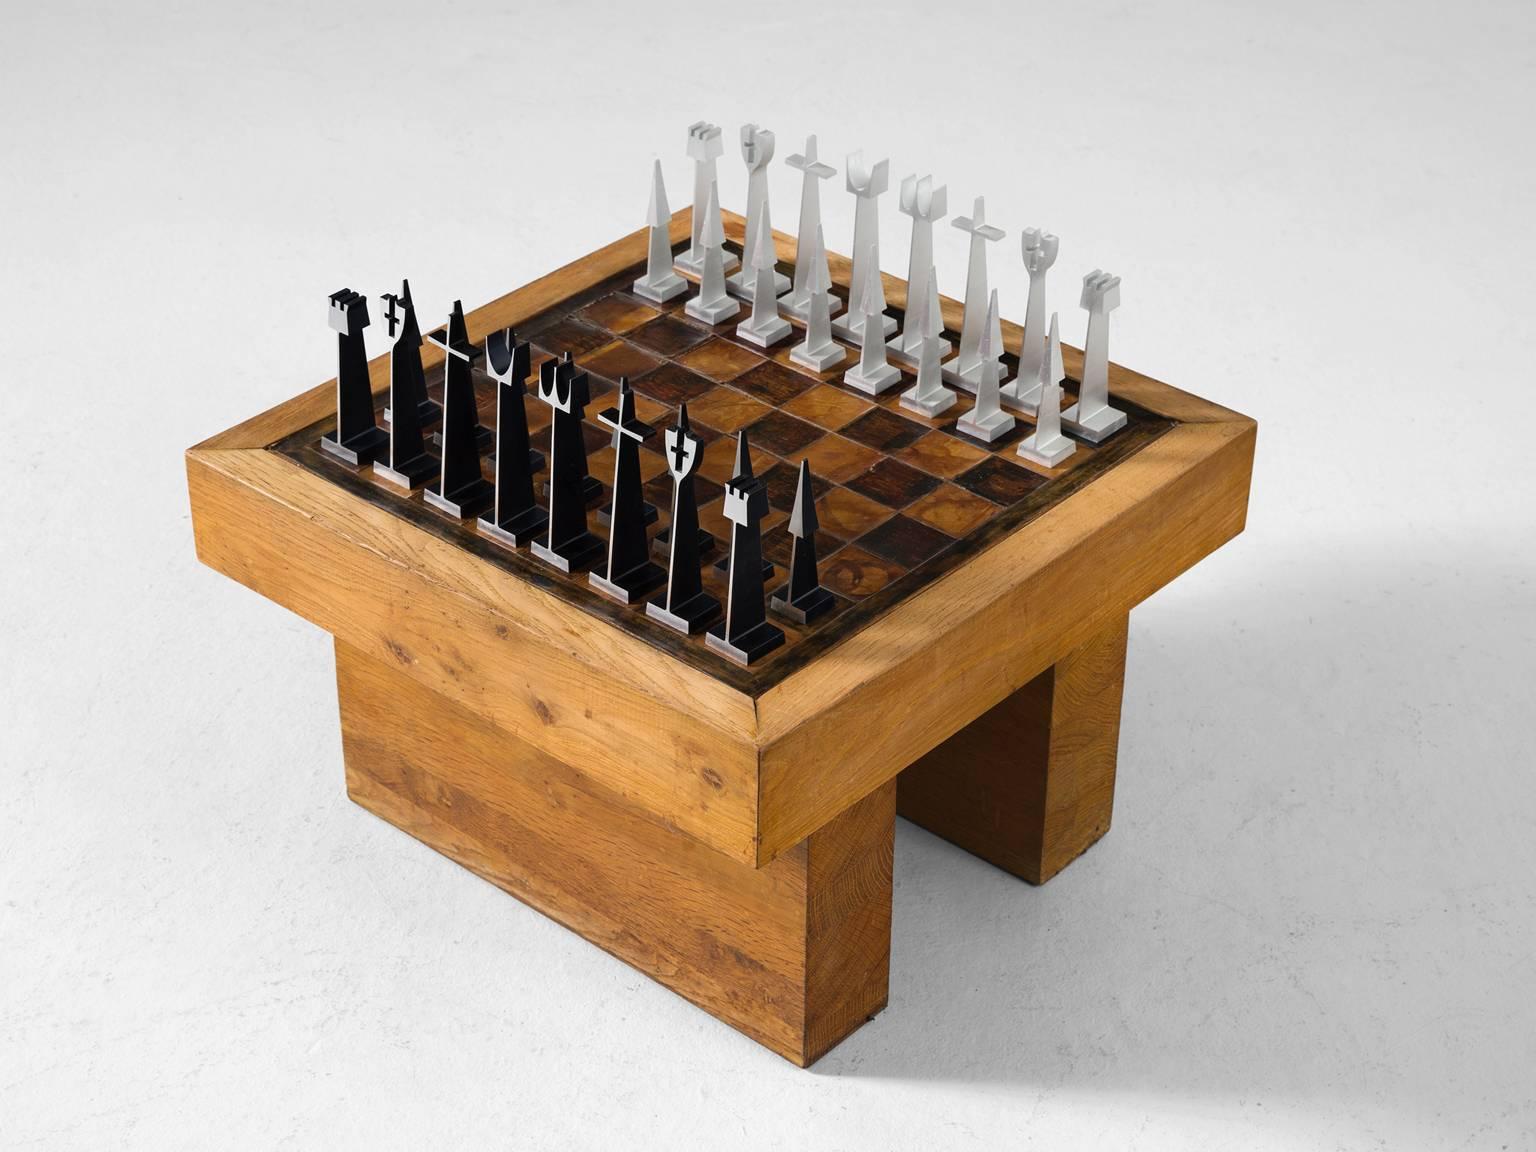 Austin Enterprises, aluminum, beech and leather chess set, 1962, United States. 

This wonderful chess set from 1962 is designed by Austin E COX (1924-2015) for Austin Enterprises and manufactured by the Alcoa Aluminum Company. The white set is made